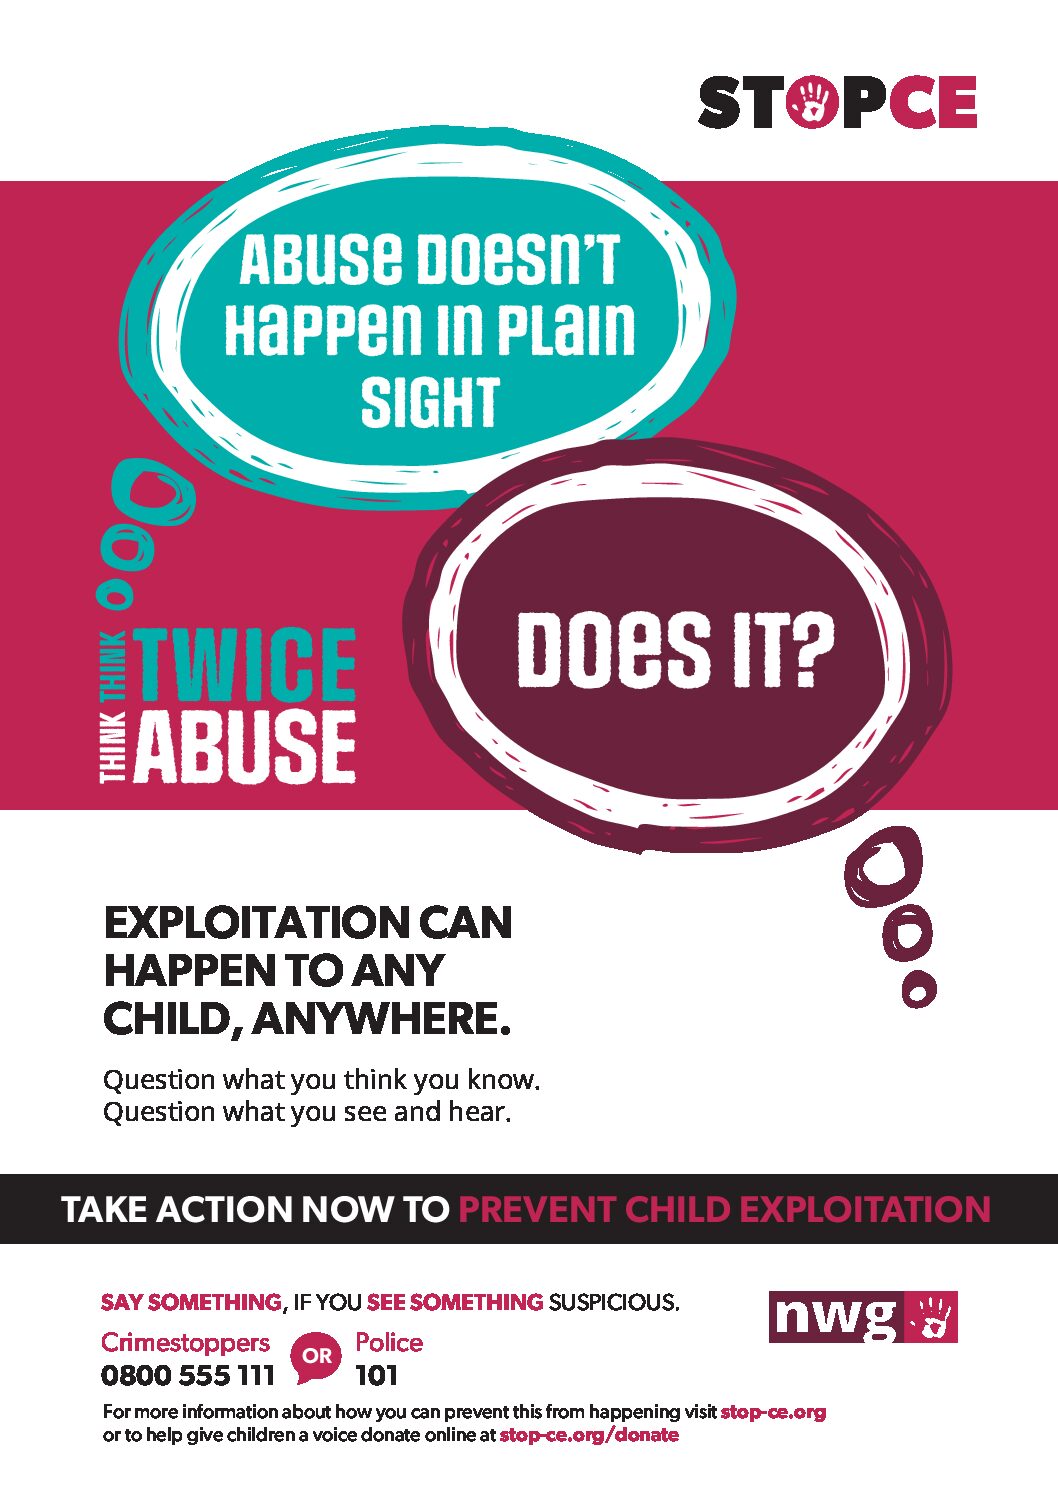 Exploitation can happen to any child, anywhere……..